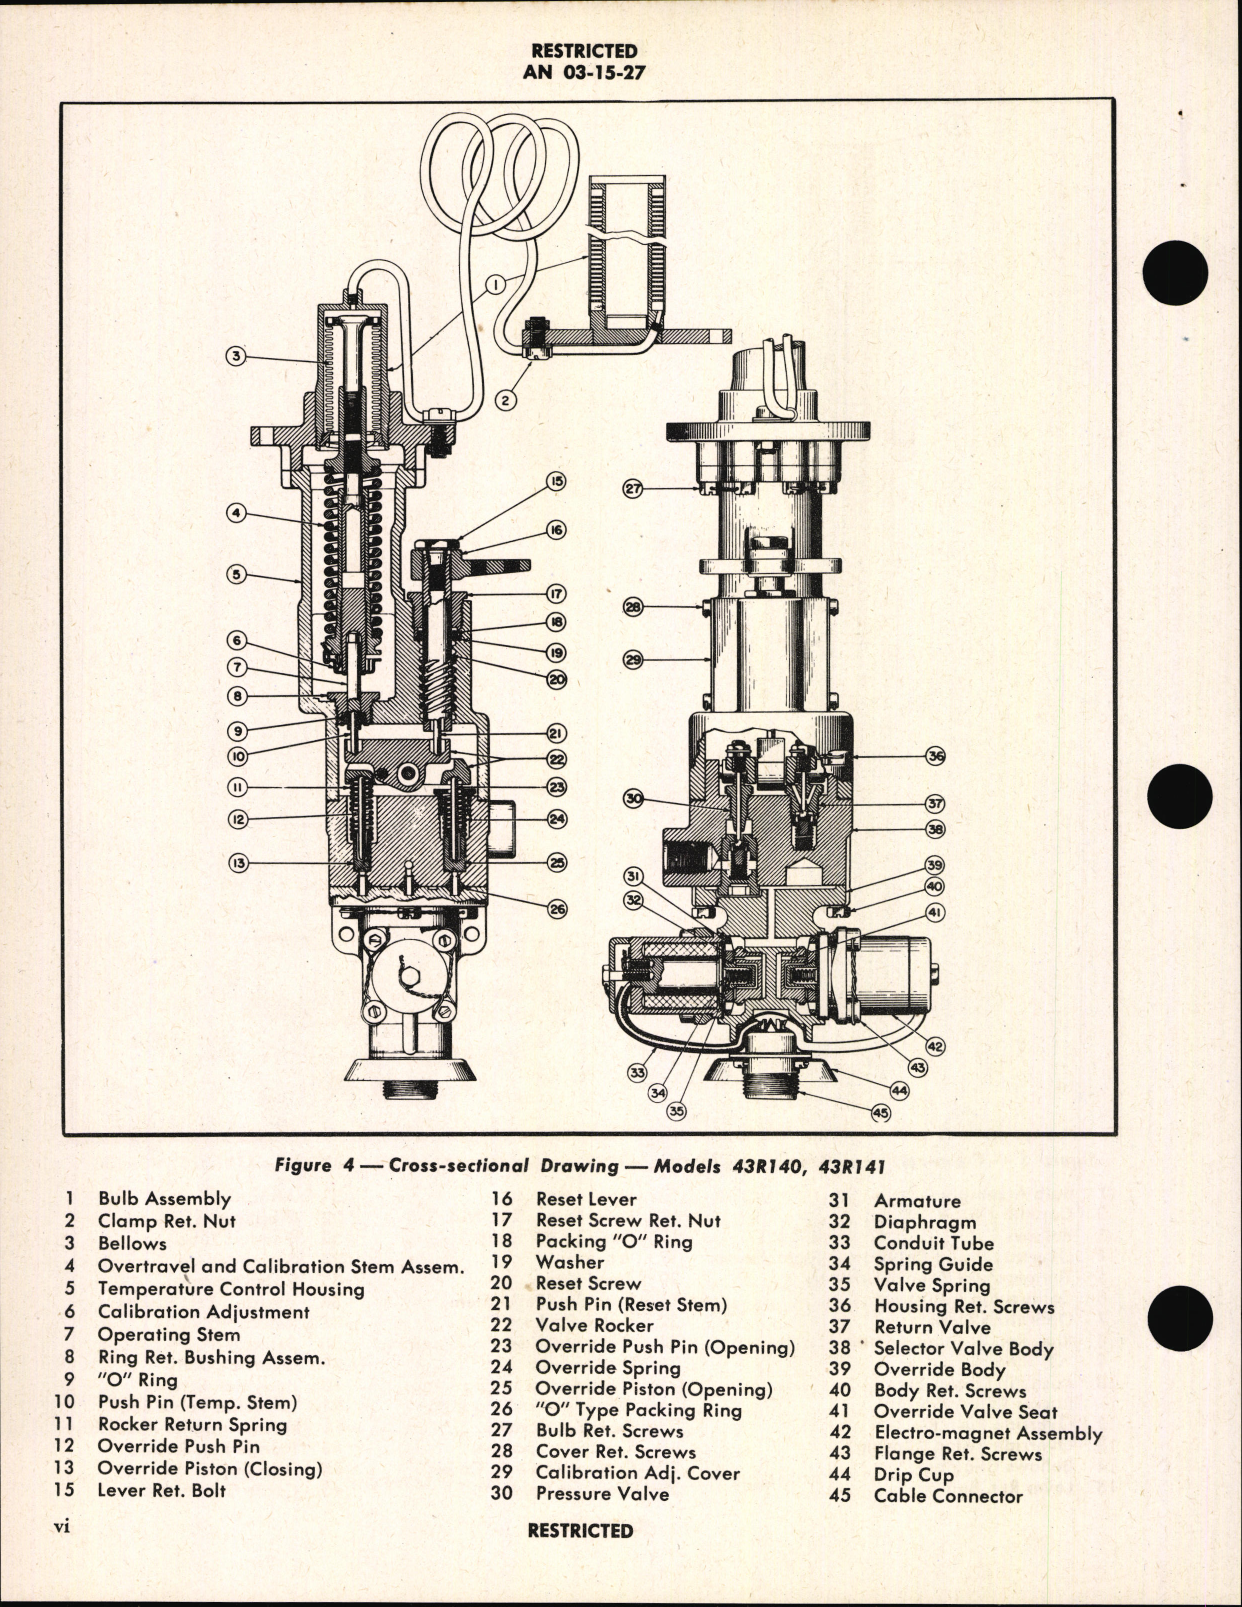 Sample page 8 from AirCorps Library document: Handbook of Instructions with Parts Catalog for Engine Coolant and Lubricating Oil Temperature Controls